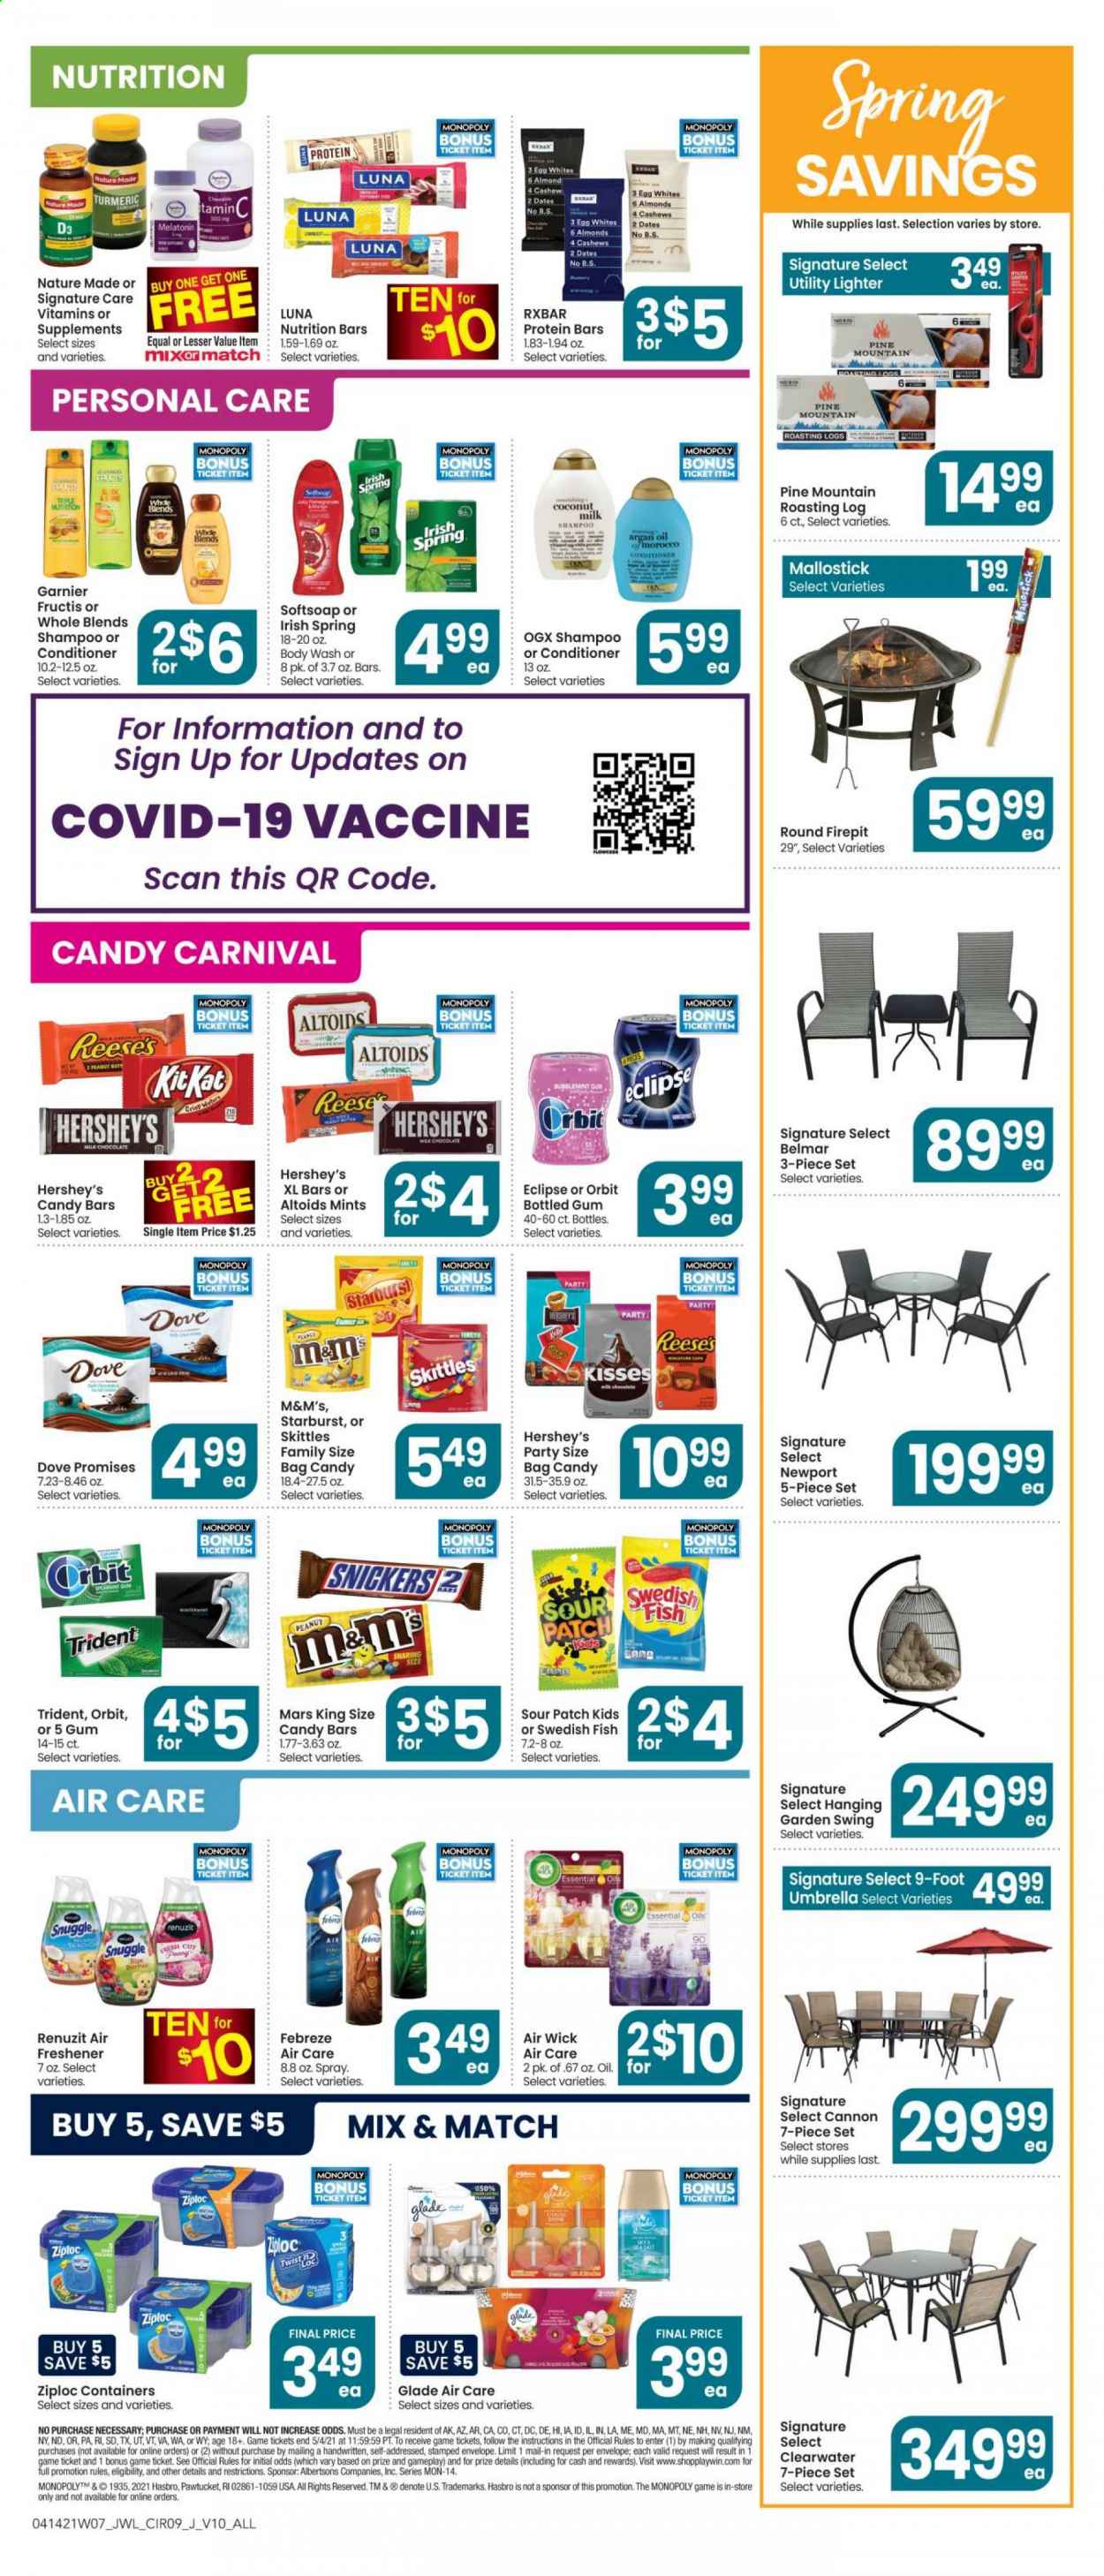 thumbnail - Jewel Osco Flyer - 04/14/2021 - 04/20/2021 - Sales products - eggs, Reese's, Hershey's, milk chocolate, chocolate, Orbit, Snickers, Mars, M&M's, Skittles, Trident, Starburst, Sour Patch, coconut milk, nutrition bar, protein bar, turmeric, oil, peanuts, dried dates, Dove, Febreze, Snuggle, body wash, shampoo, Softsoap, Garnier, conditioner, Fructis, Ziploc, cup, envelope, Renuzit, air freshener, Air Wick, Glade, essential oils, Melatonin, Nature Made, argan oil, vitamin D3. Page 9.